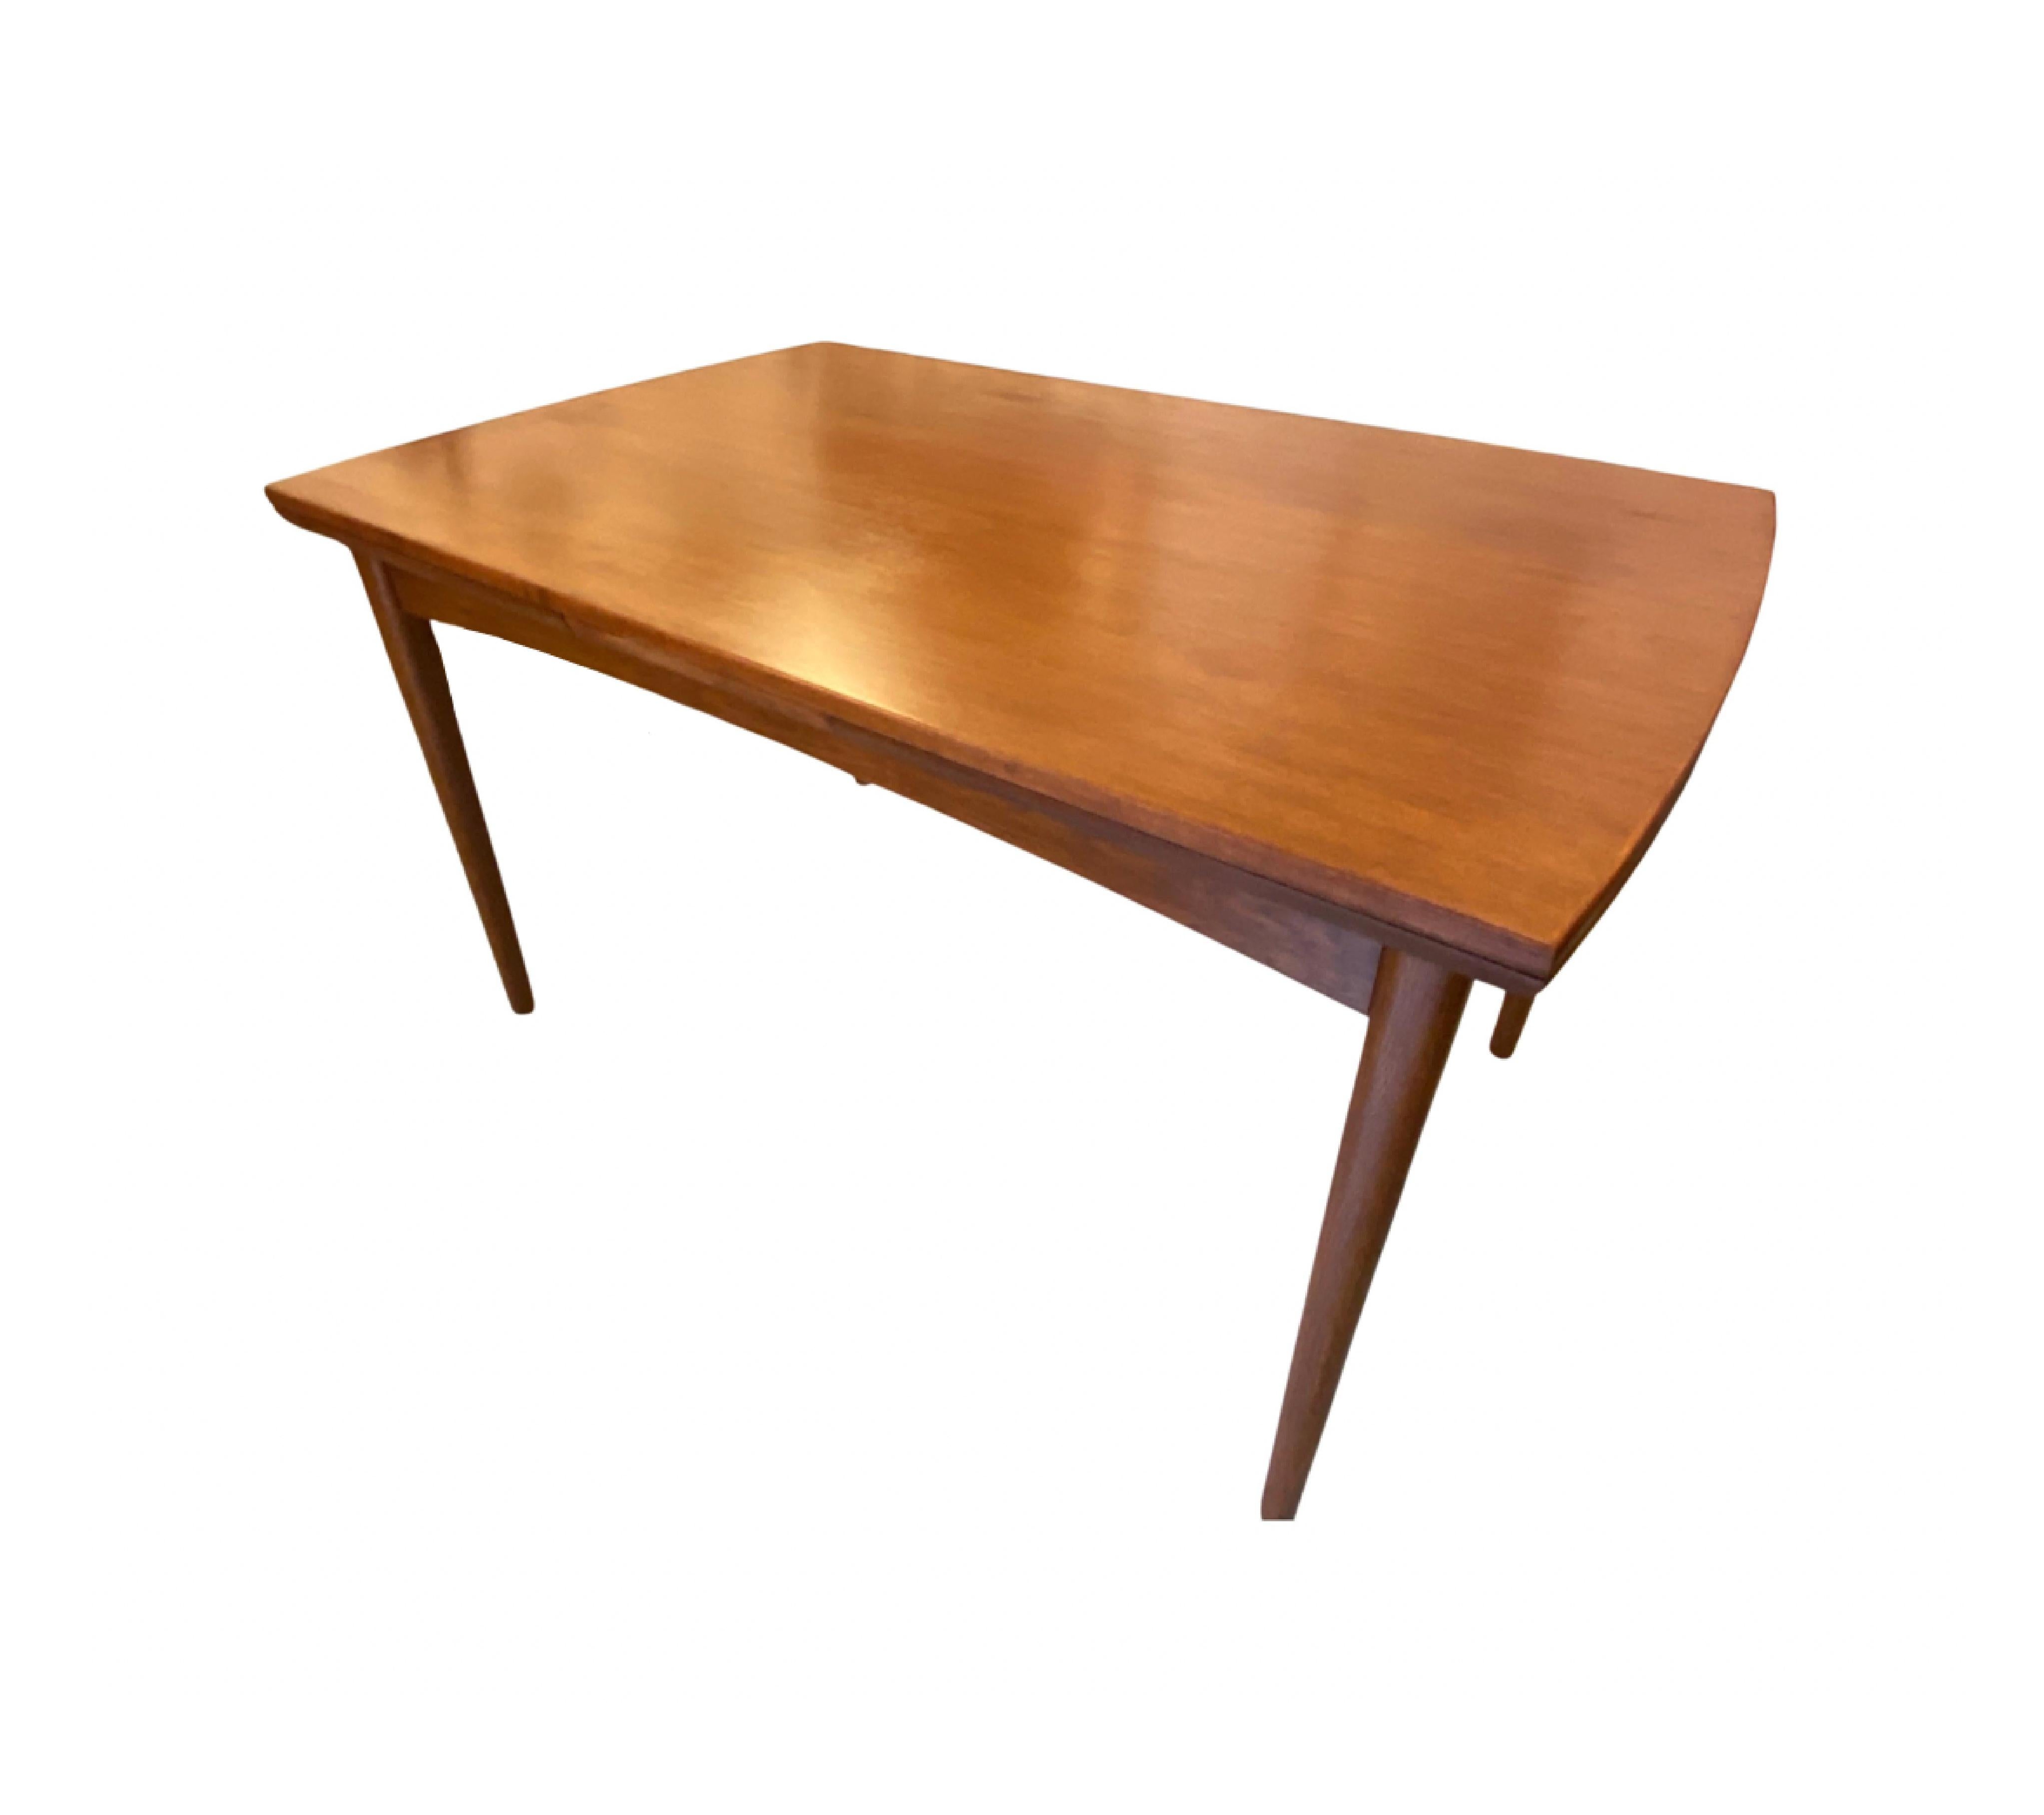 Beautiful and classic Danish mid-century dining table in teak with Dutch extensions.

With extensions the tables is 229 cm.

We have gently restored the table to the absolute highest standard while keeping its original style and appearance.  